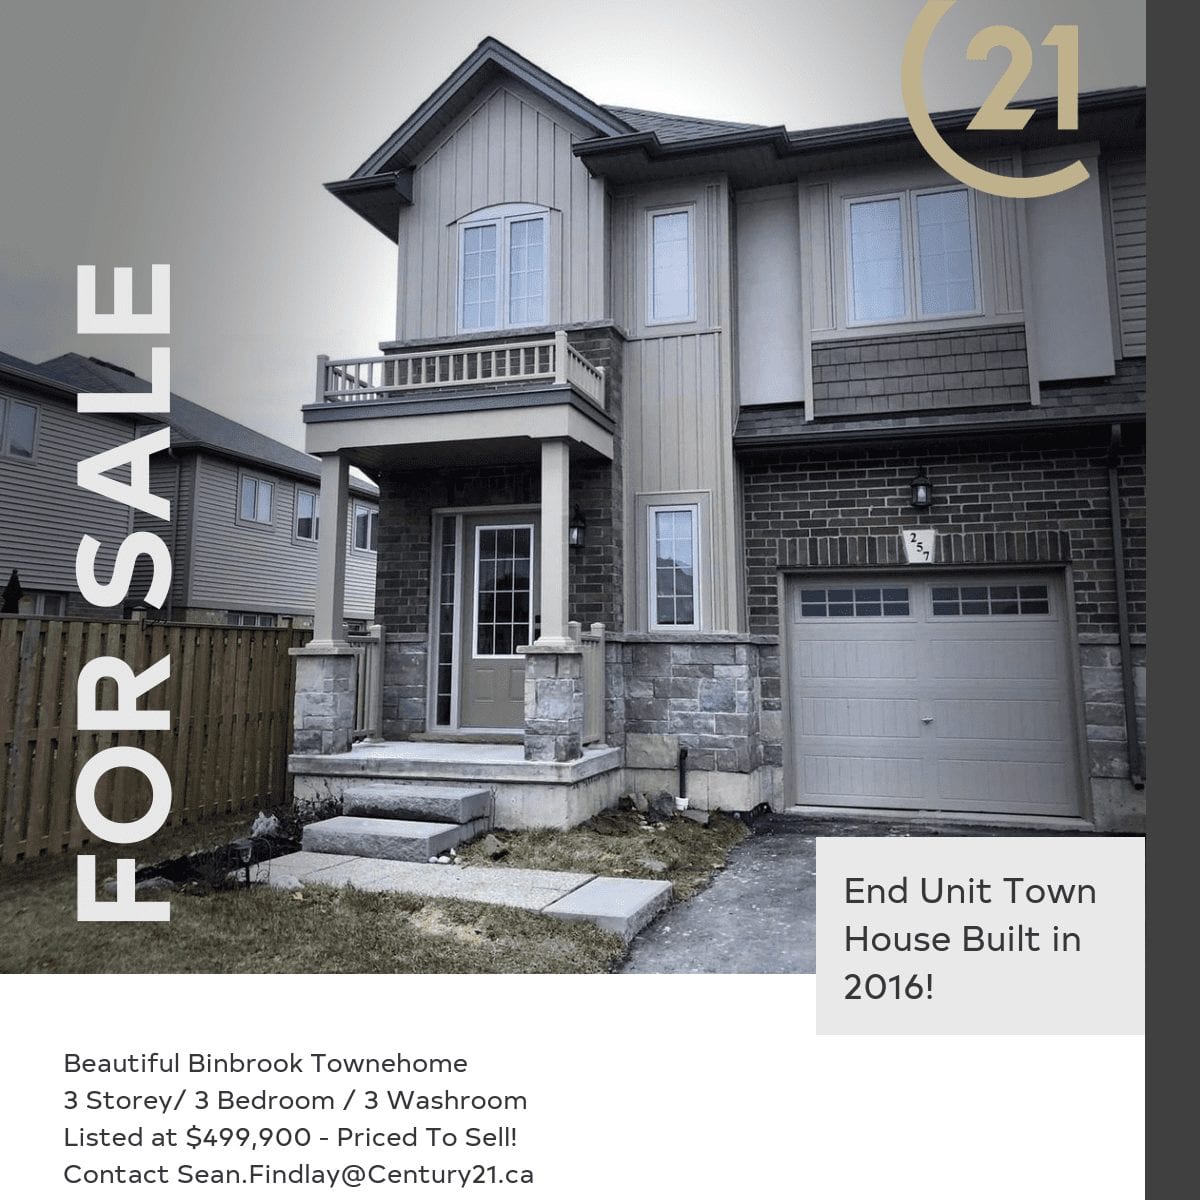 Featured Binbrook Townhome For Sale: Move in Immediately